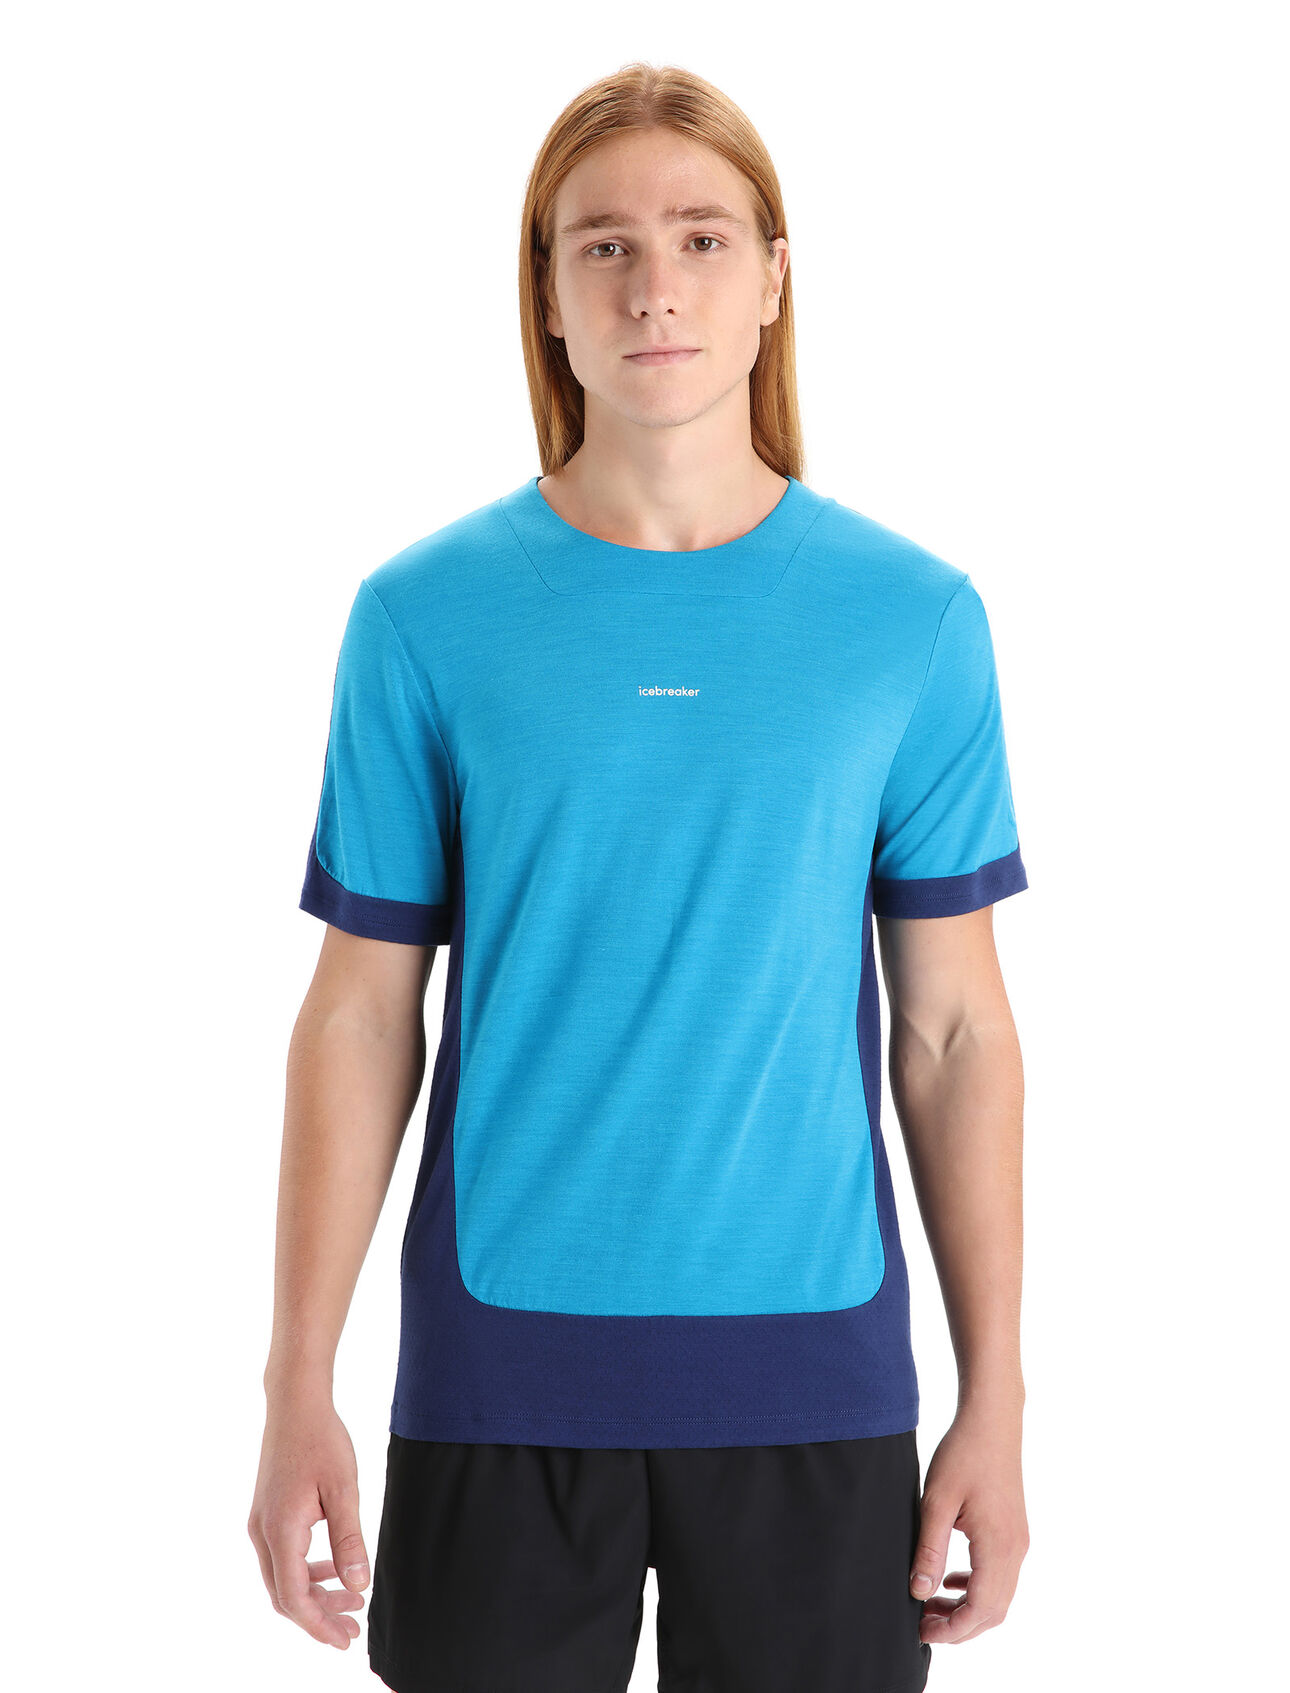 Mens ZoneKnit™ Merino Short Sleeve T-Shirt Our most breathable and lightweight tee for high-exertion activities, the ZoneKnit™ Short Sleeve Tee features a clean design with mesh panels to help regulate your body temperature.